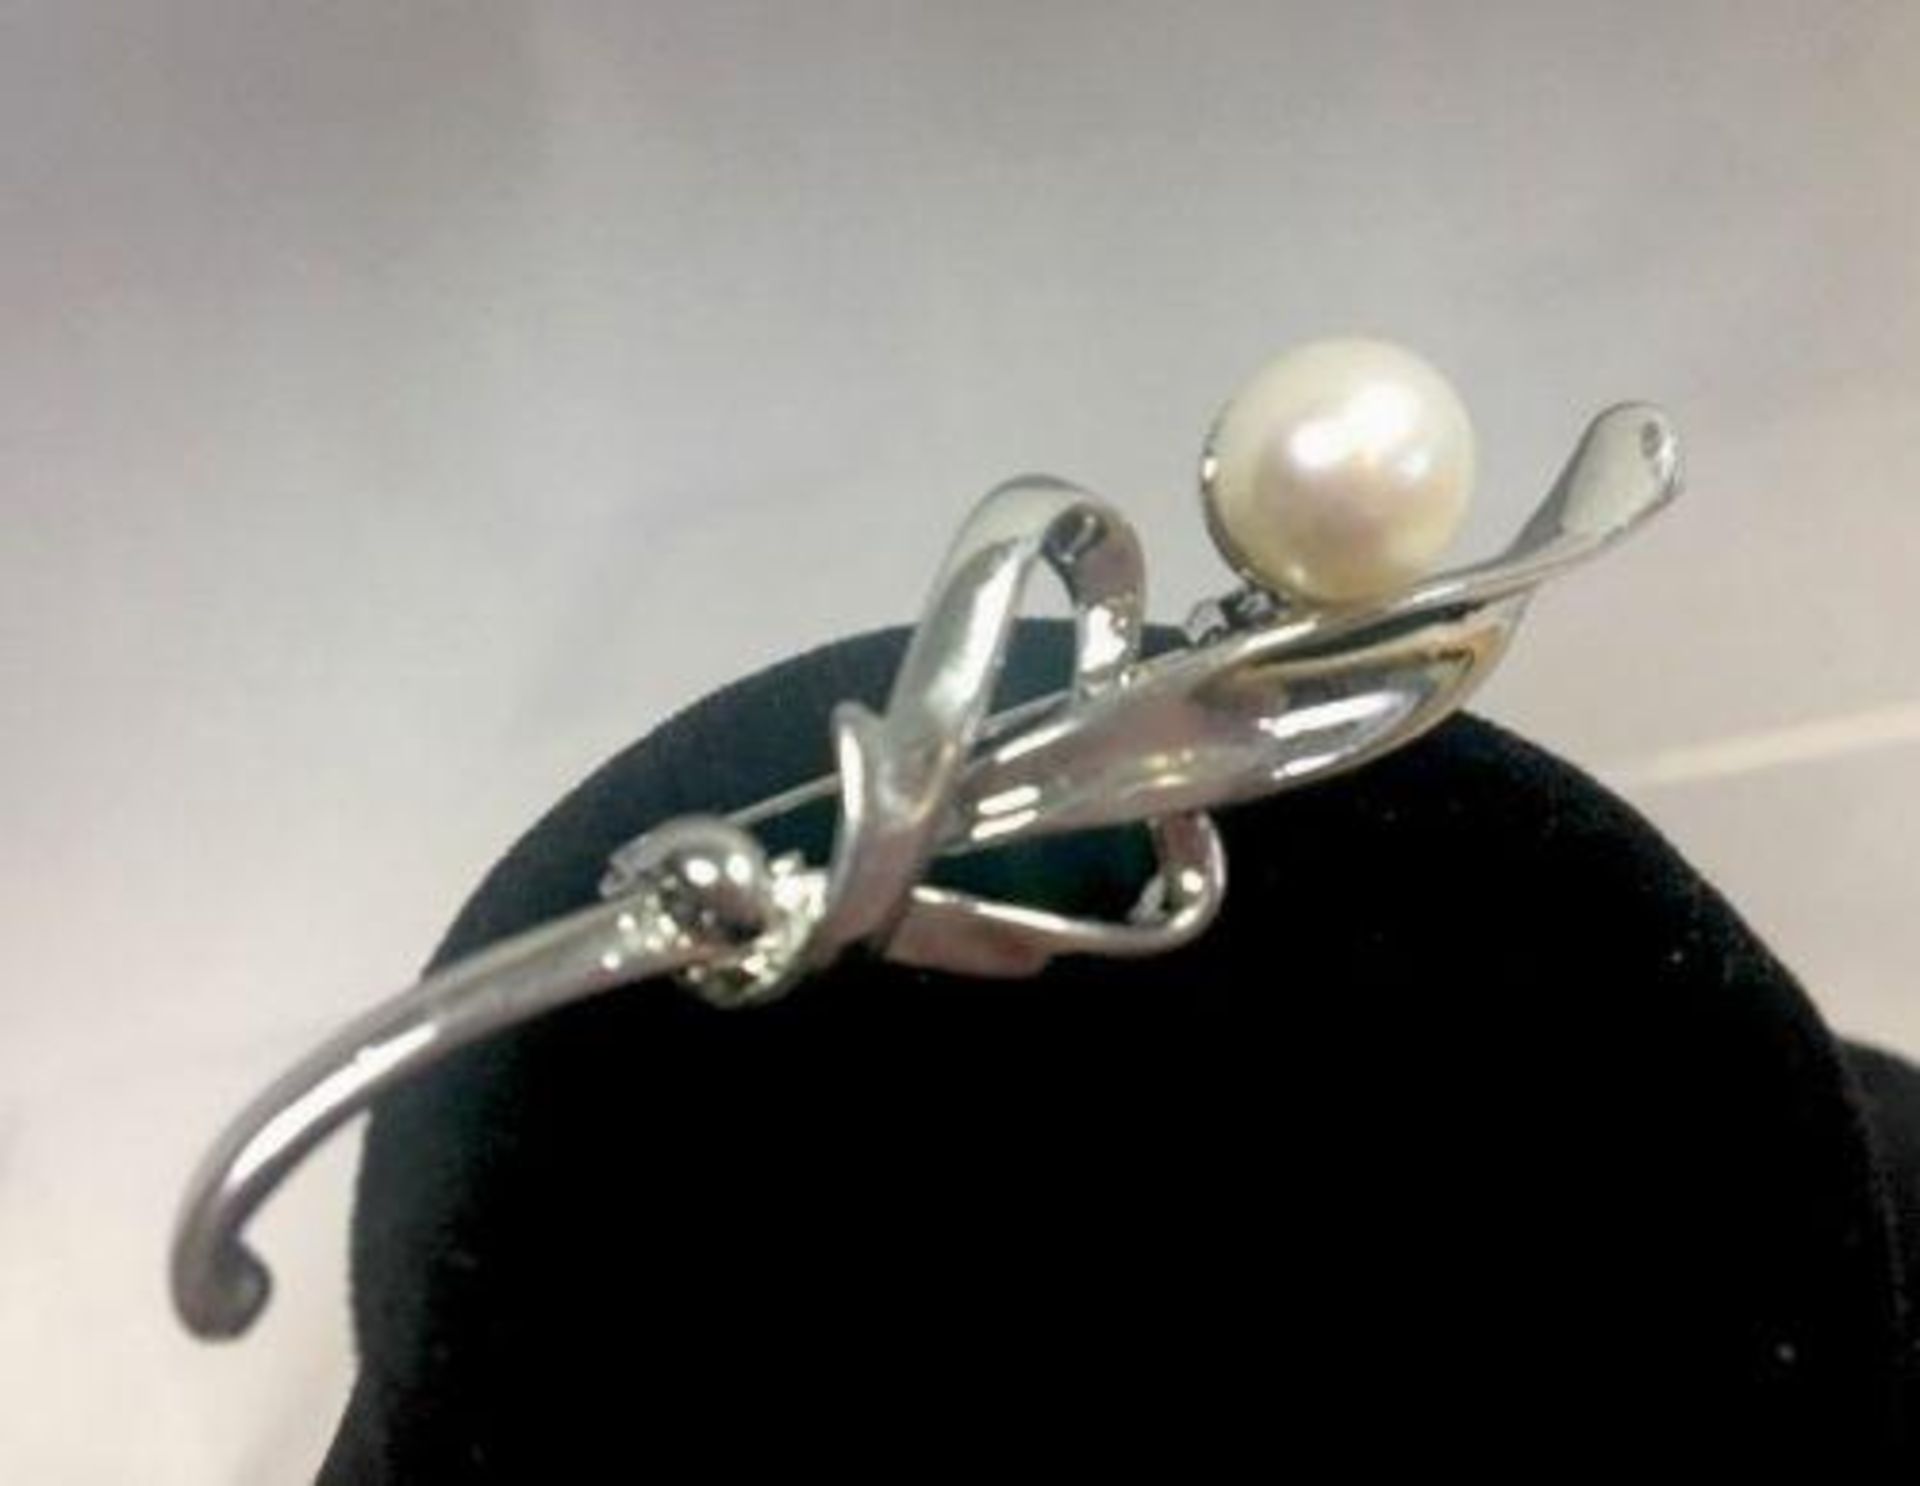 Beautiful brooch with a large genuine pearl. In the form of a rose / flower. The pearl is approx 8mm